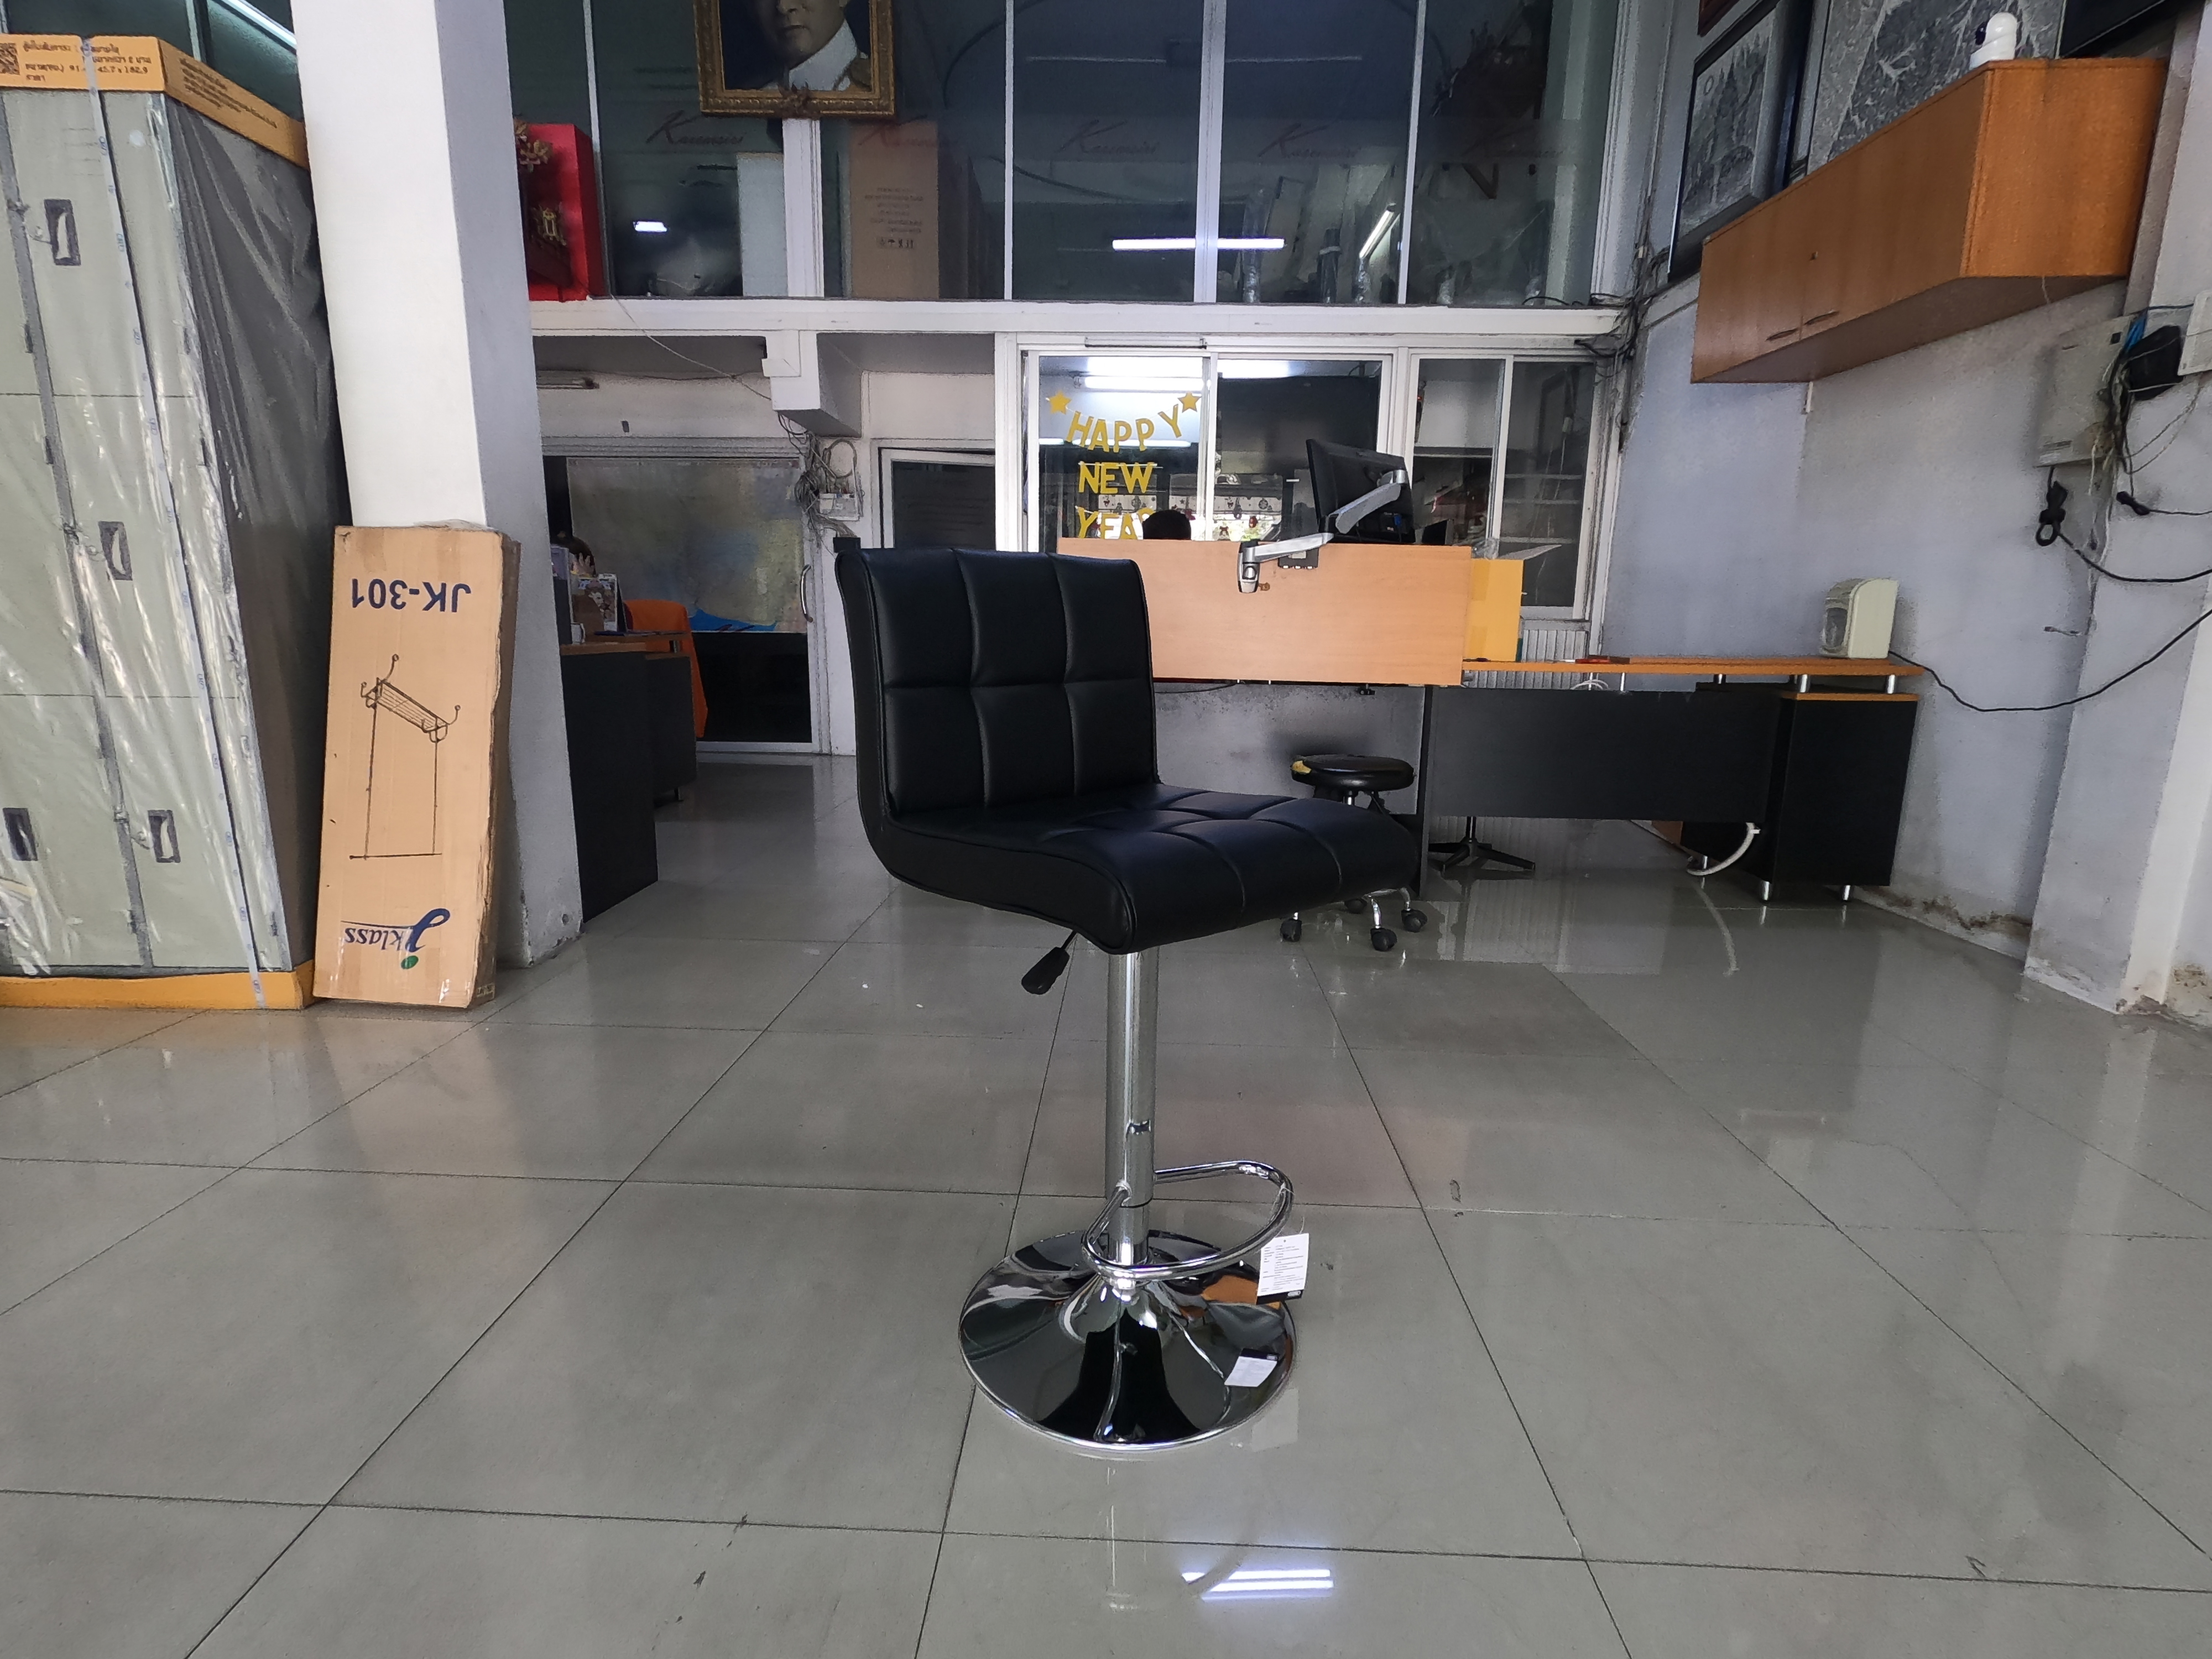 91064::HB-174::A Sure bar stool. Dimension (WxDxH) cm : 46x43x65-86.5. Available in Black, White and Red. 2 chairs per 1 pack SURE Bar Stools SURE Bar Stools